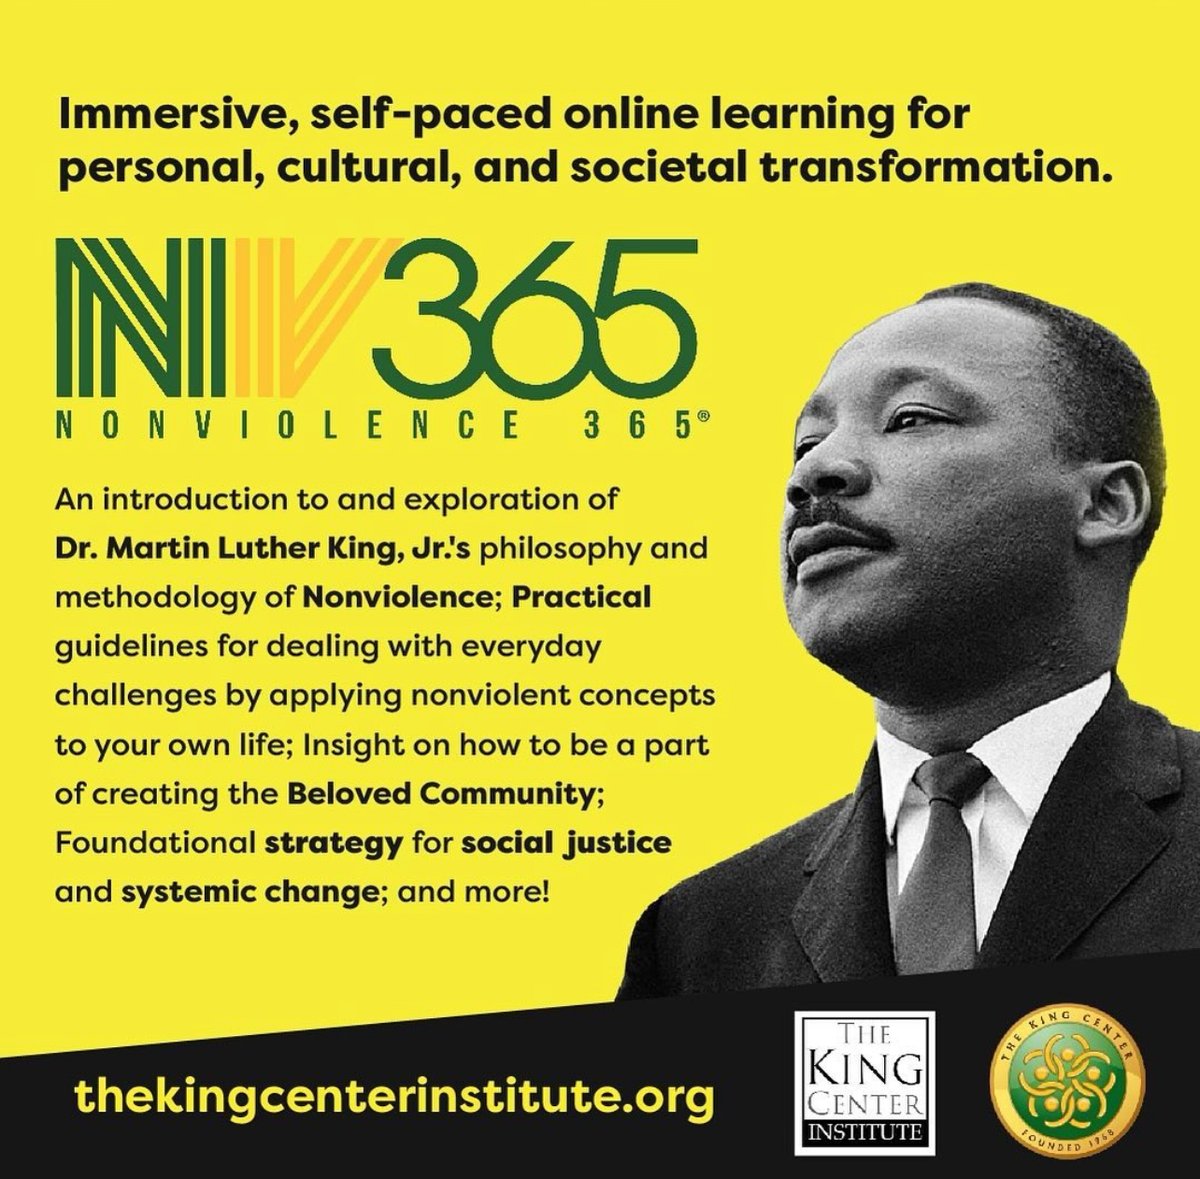 Study #KingianNonviolence with an immersive, self-paced online course on #MLK's philosophy of nonviolence. Start your journey today! thekingcenterinstitute.pulse.ly/gxej8m9m29